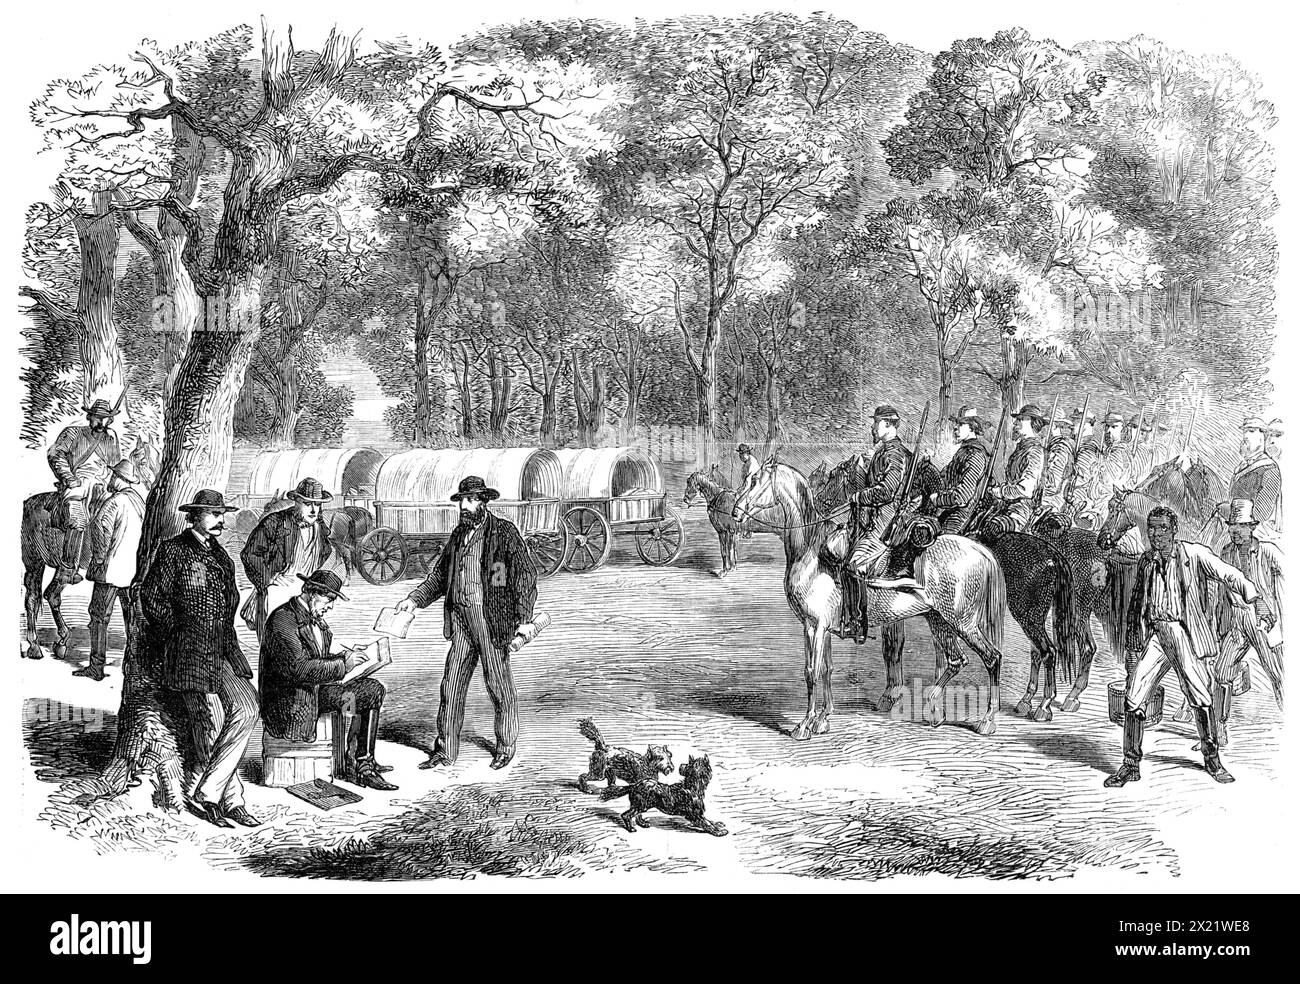 The Last Days of the Confederate Government - Mr. Jefferson Davis signing acts of government by the roadside, 1865. '...from a sketch by our special artist...[showing] Mr. Davis and his Cabinet halting by the roadside; the ex-President engaged in signing papers which Mr. Benjamin, his Secretary of State, is handing to him. This was probably the last official business transacted by the Confederate Cabinet, and may well be termed &quot;Government by the roadside.&quot; Our readers must bear in mind that at any moment the alarm might be given of the enemy's advance, and, to say the least, such a Stock Photo